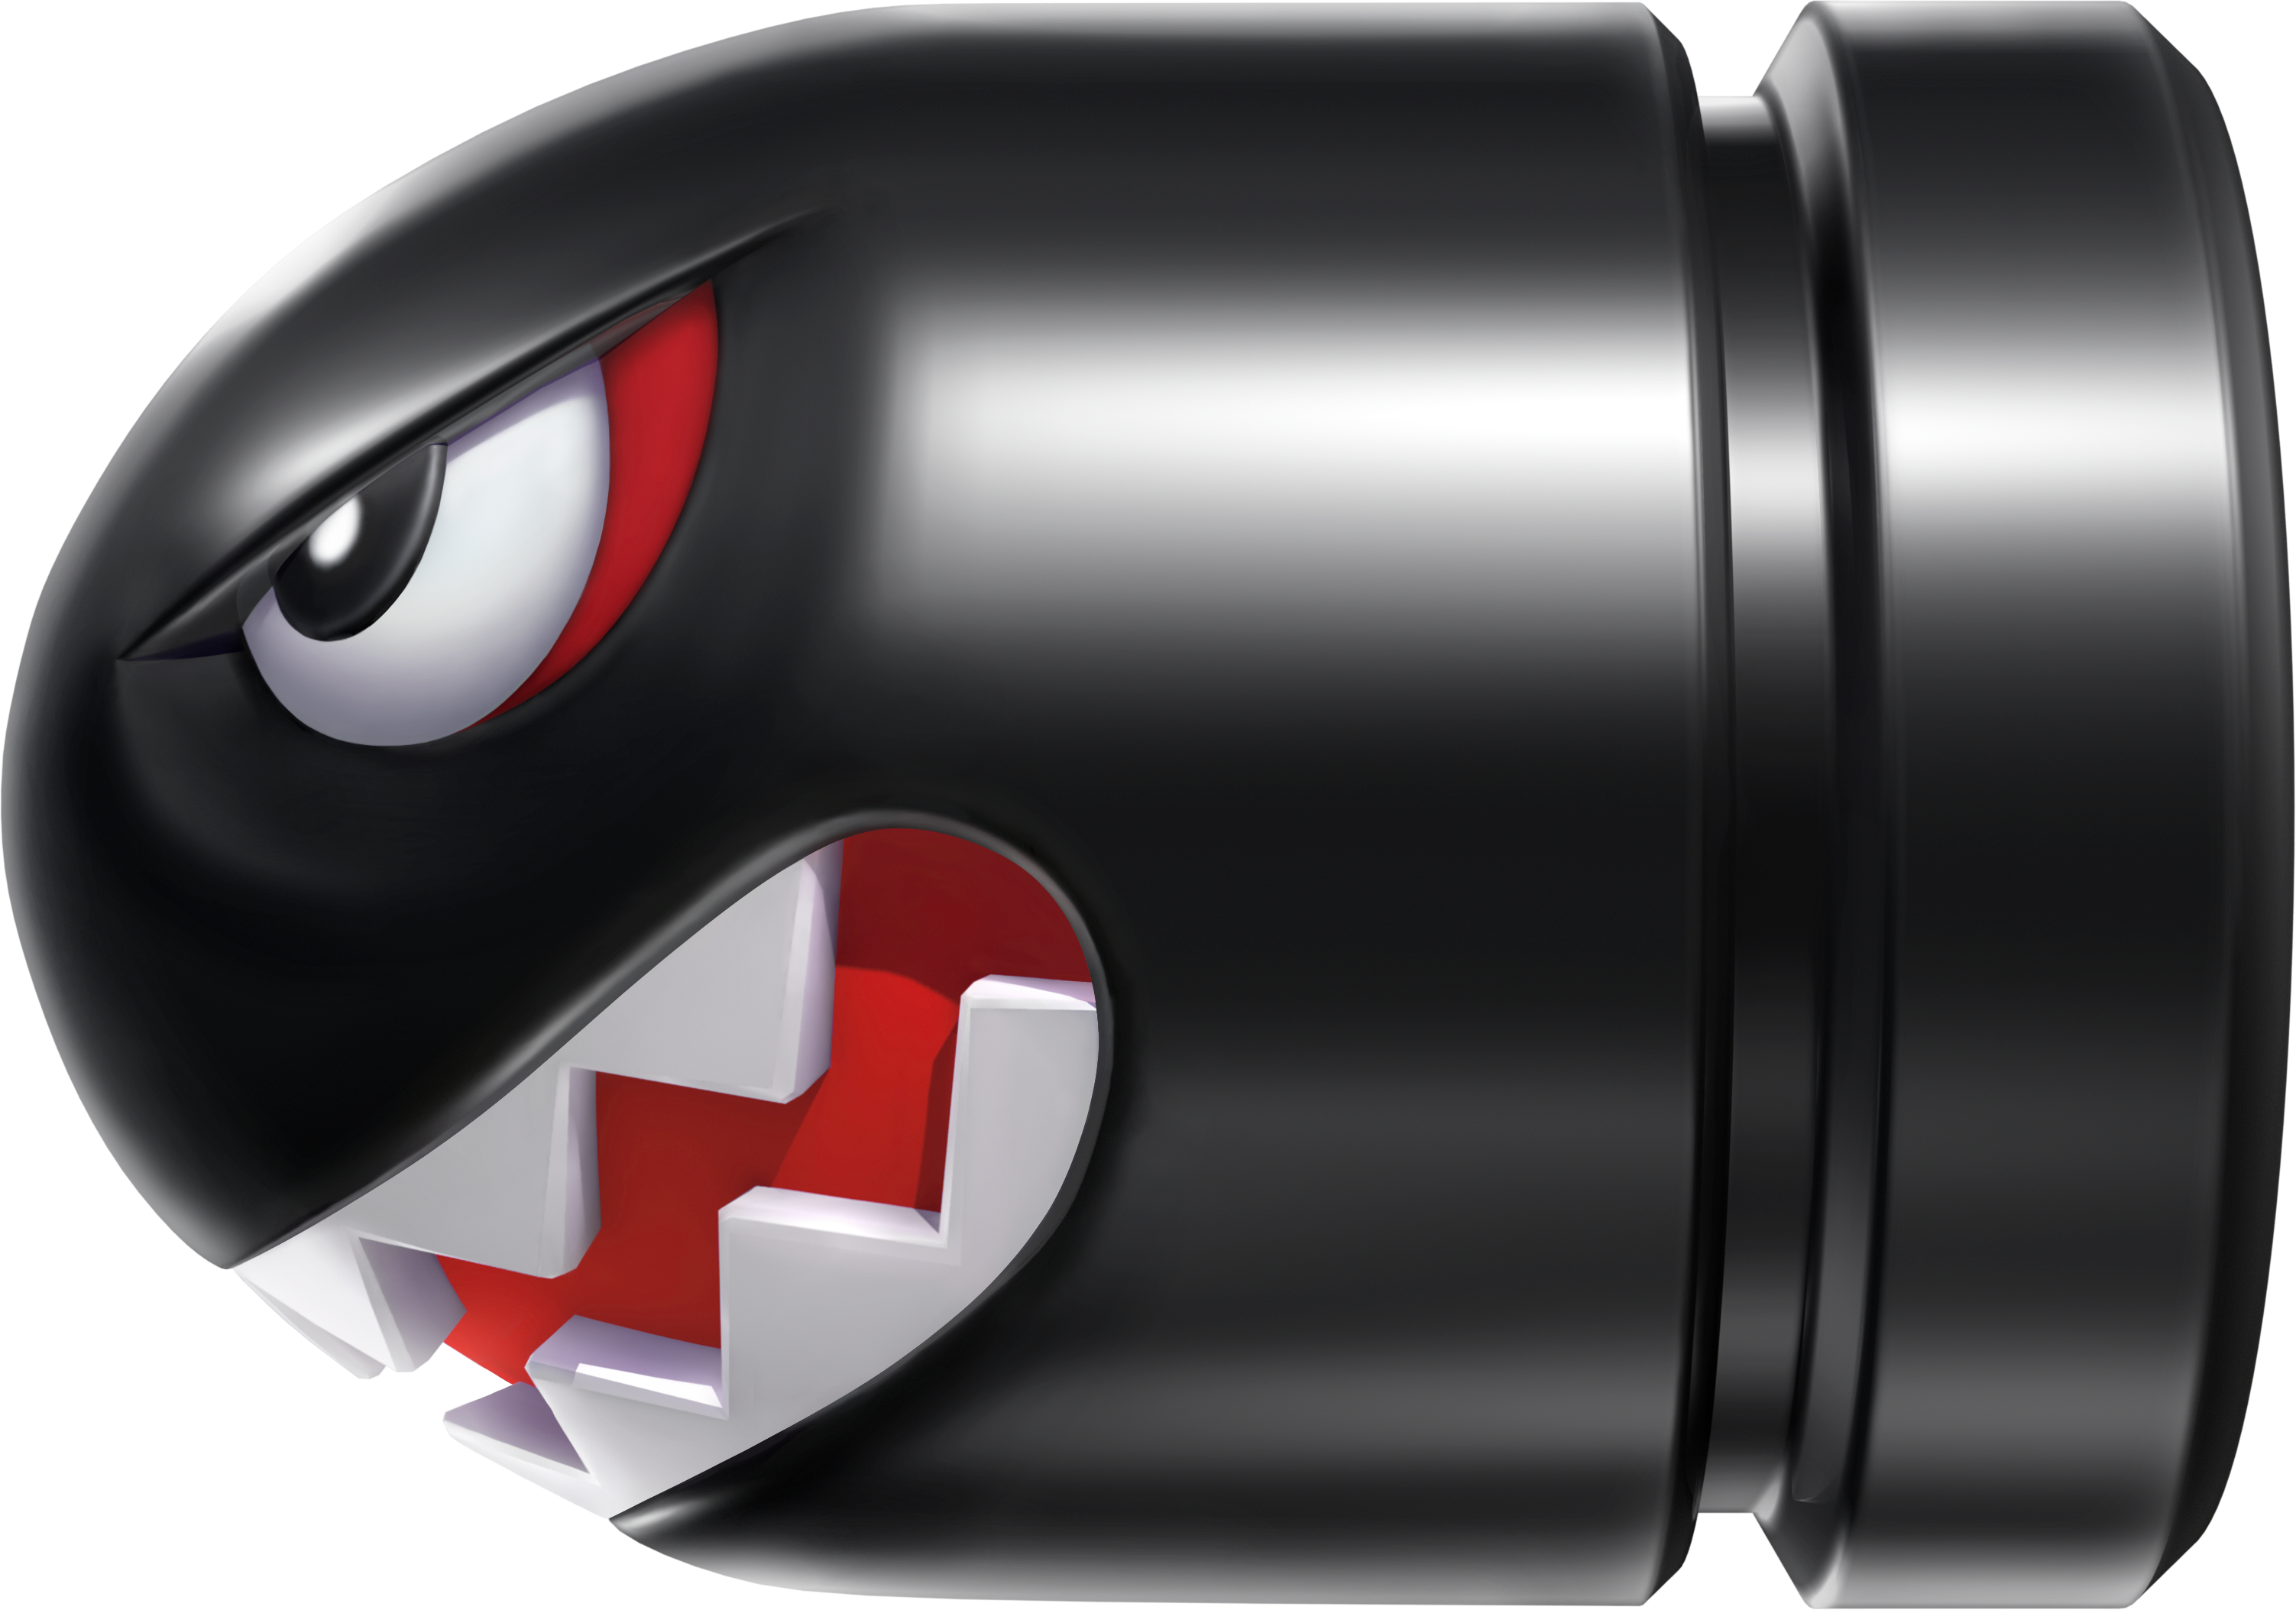 Technology Wii Lens Mario Bros World Super PNG Image